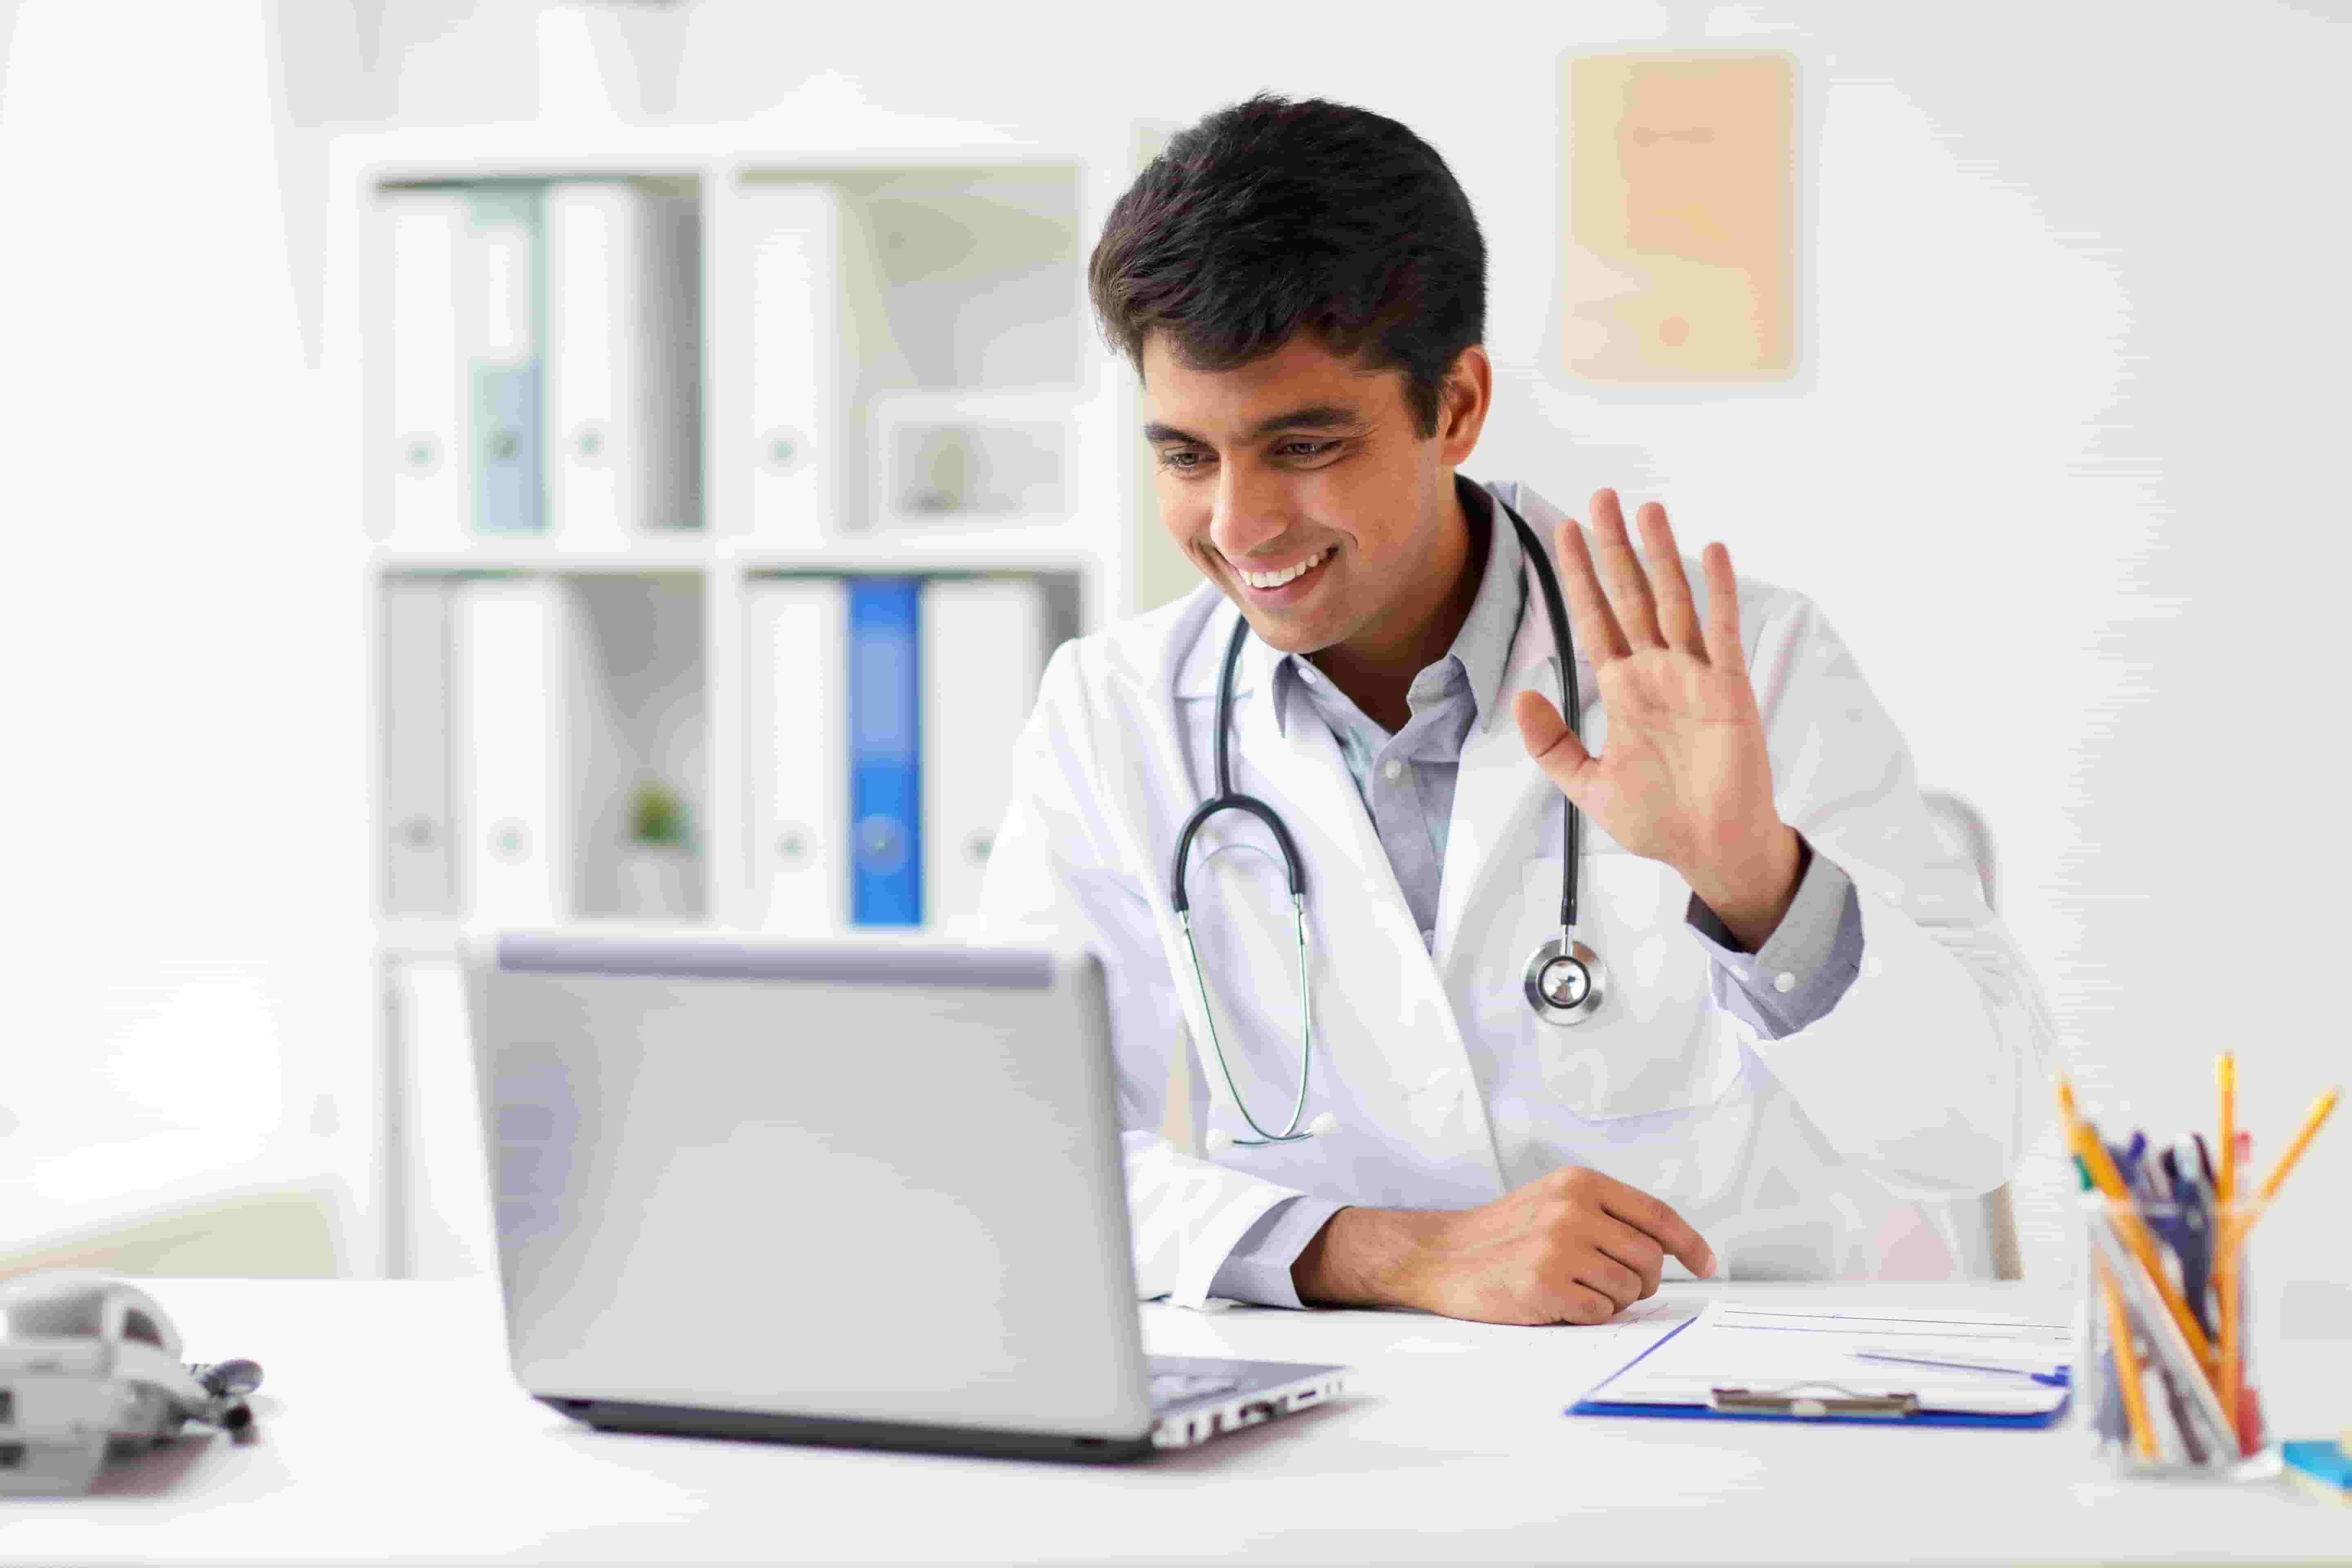 Doctor waving on a video call